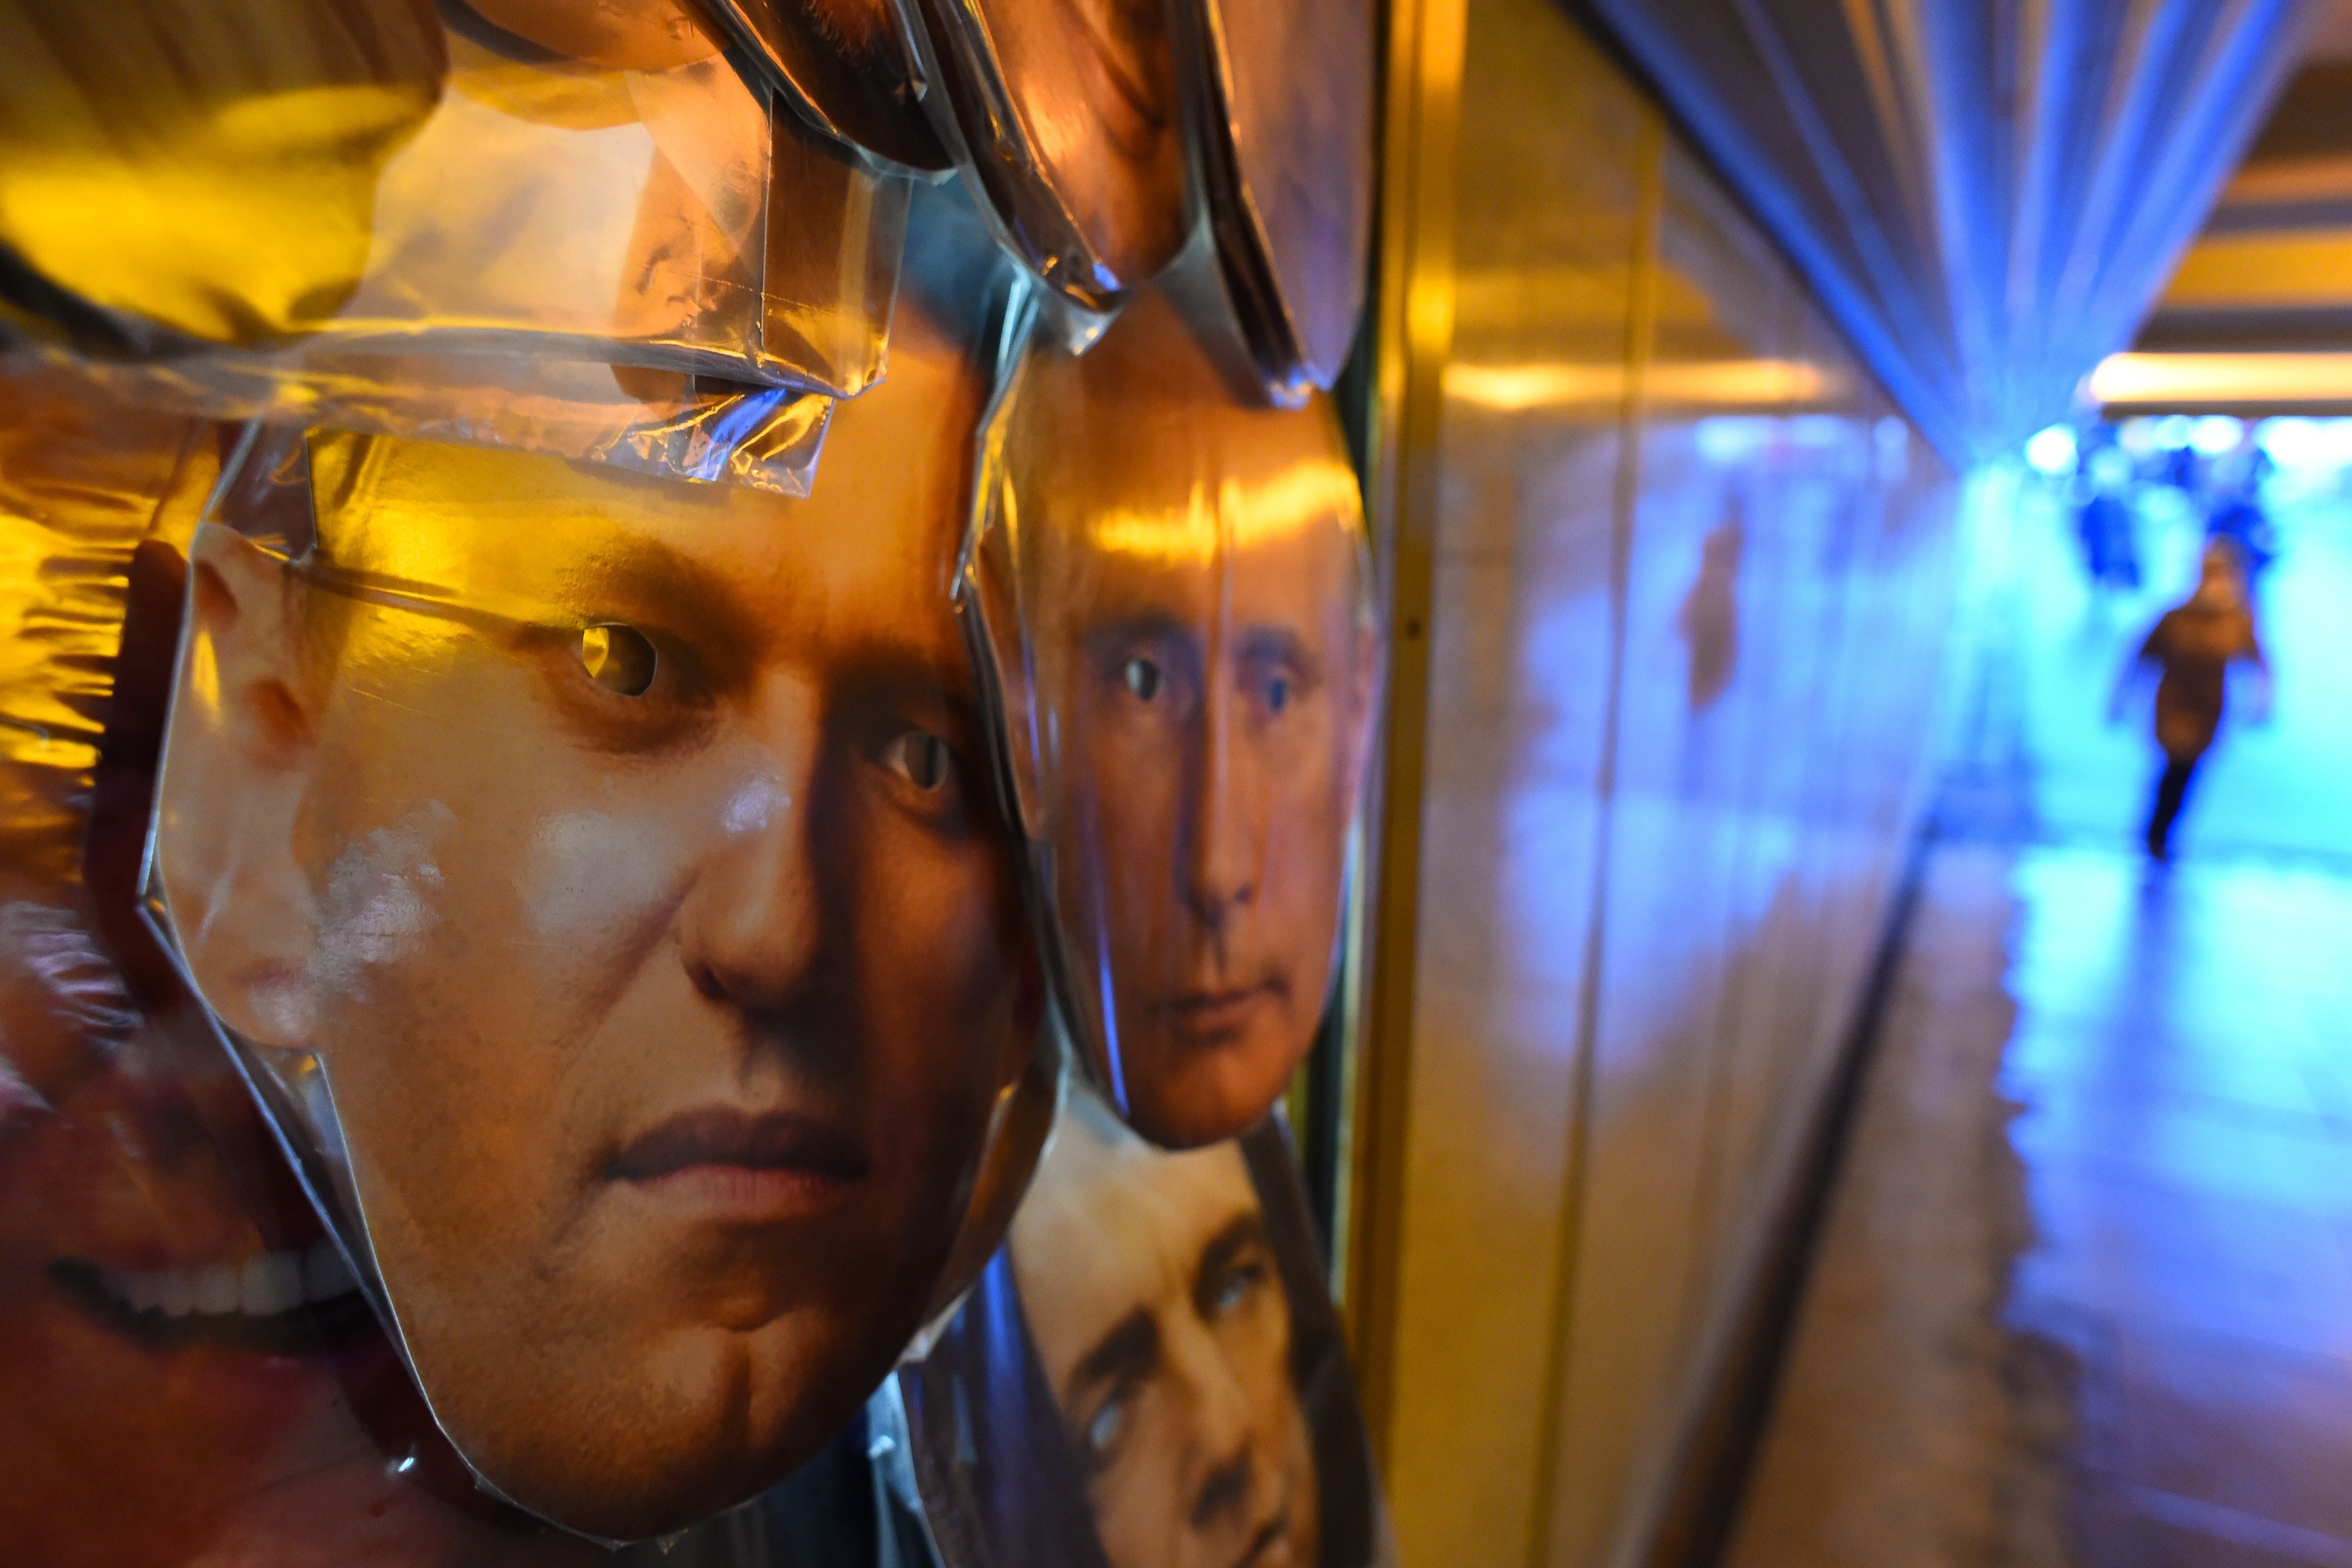 Masks of opposition leader Alexei Navalny and President Vladimir Putin are seen on sale at a souvenir stall in an underground passage in Saint Petersburg&nbsp;